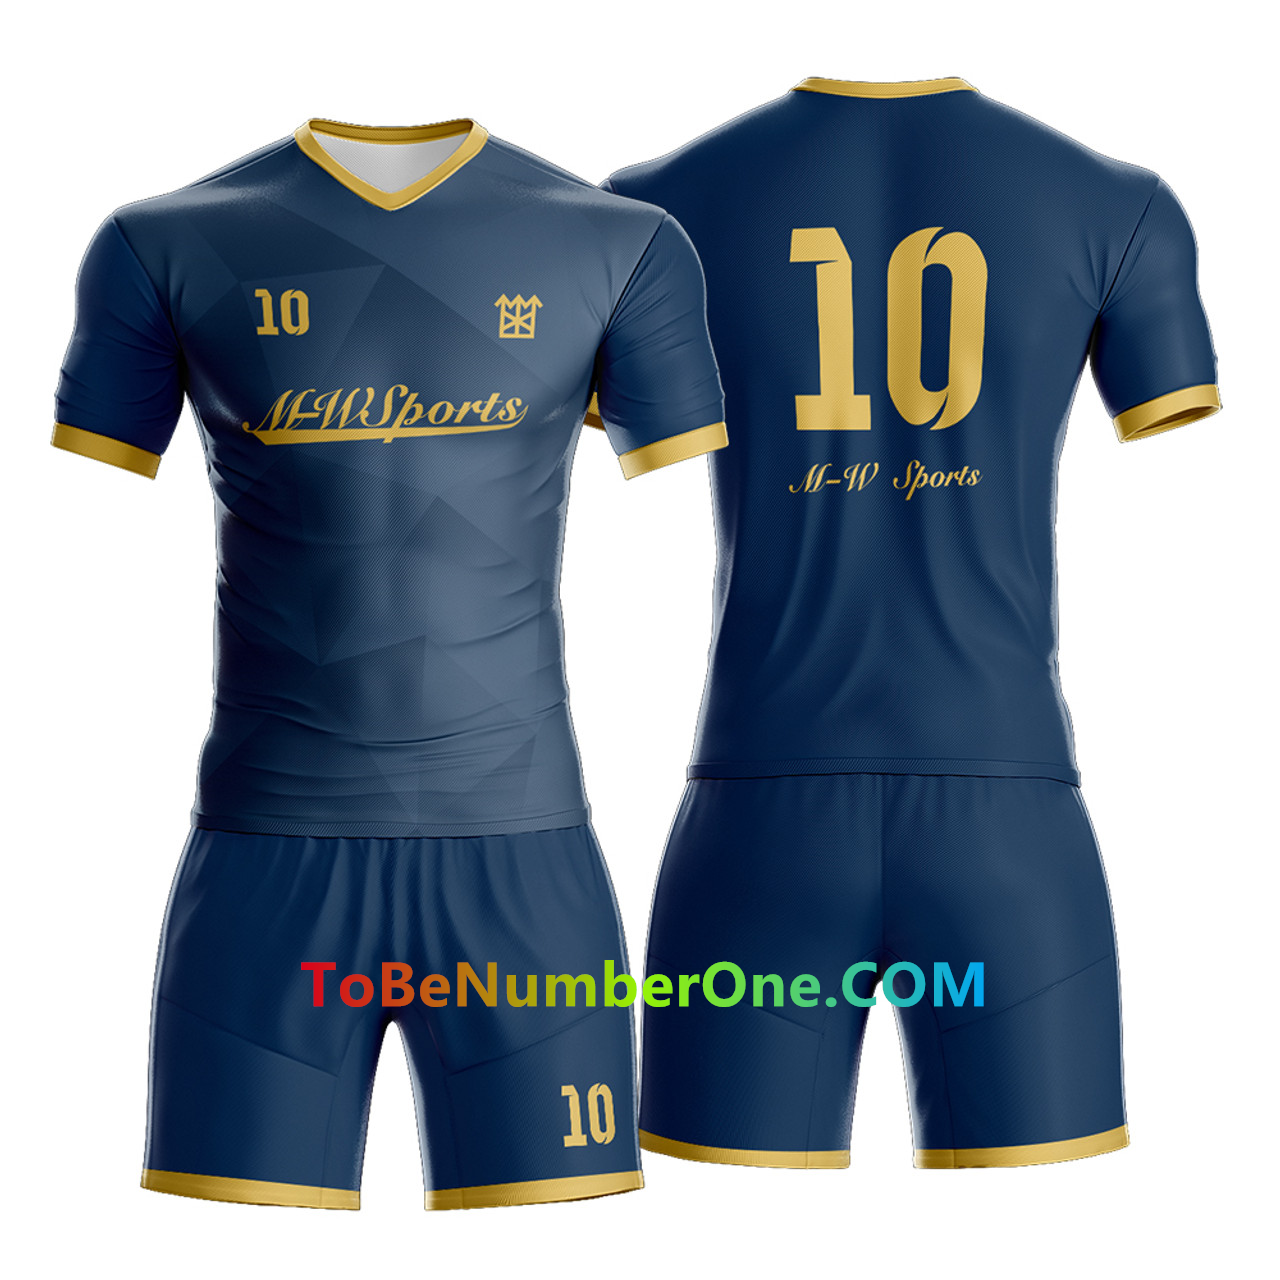 Full Customize Team Football Jerseys  Custom Soccer Uniforms add with name,number,logo.